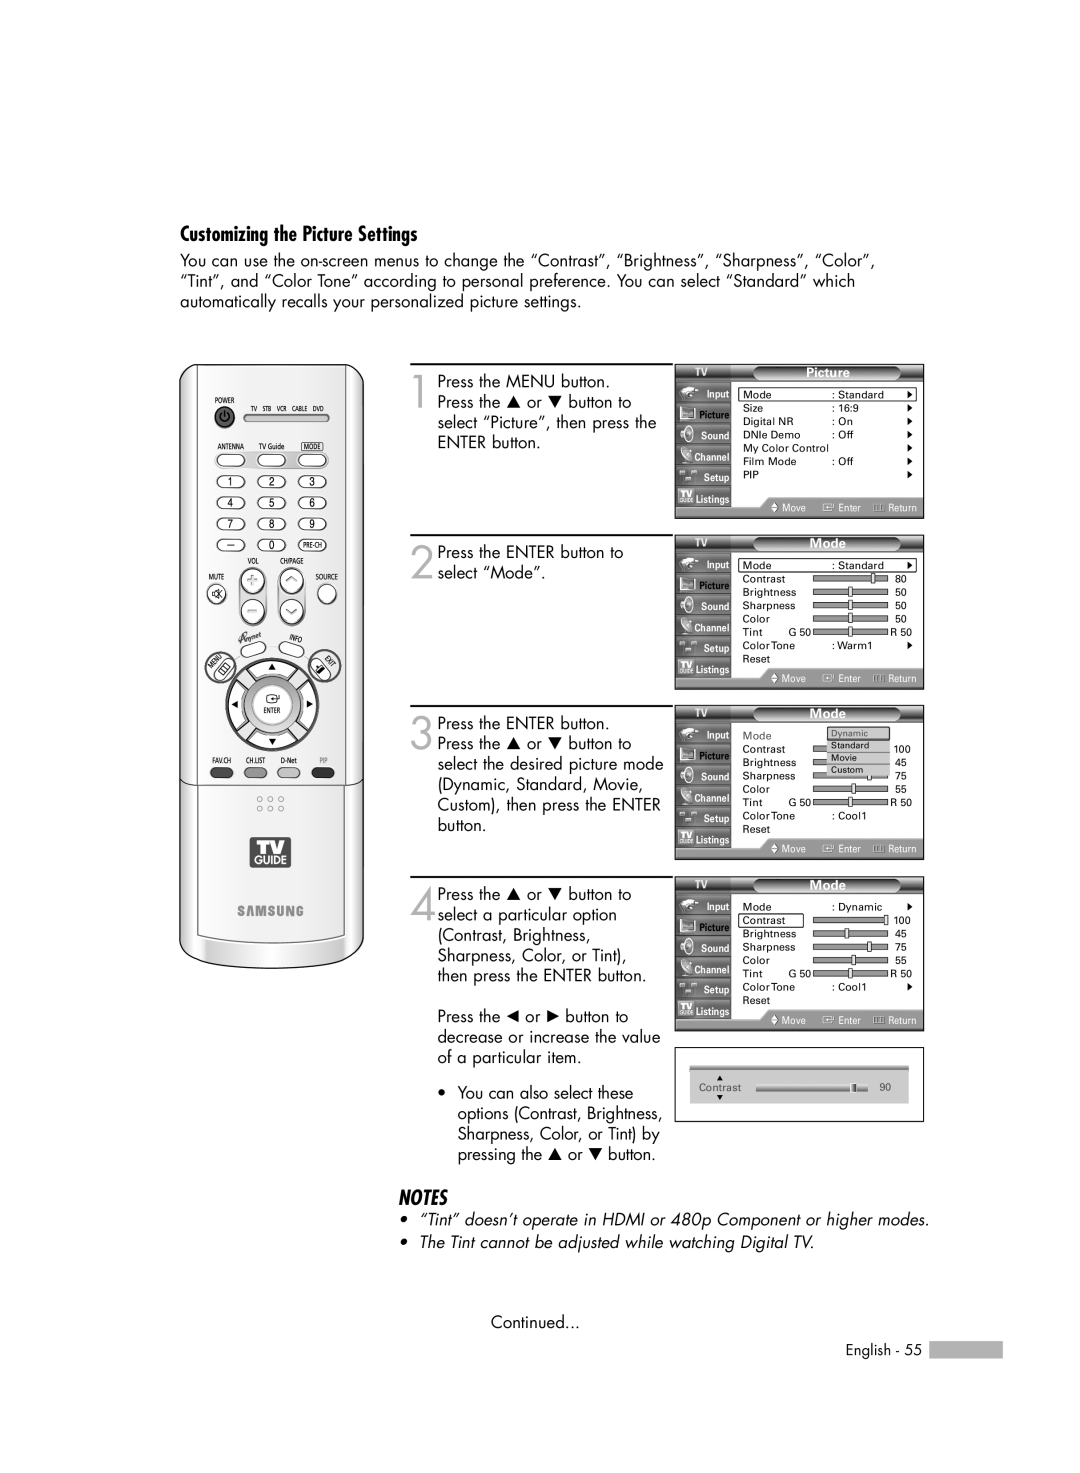 Samsung HL-R5678W, HL-R6178W, HL-R7178W manual Customizing the Picture Settings, Notes 